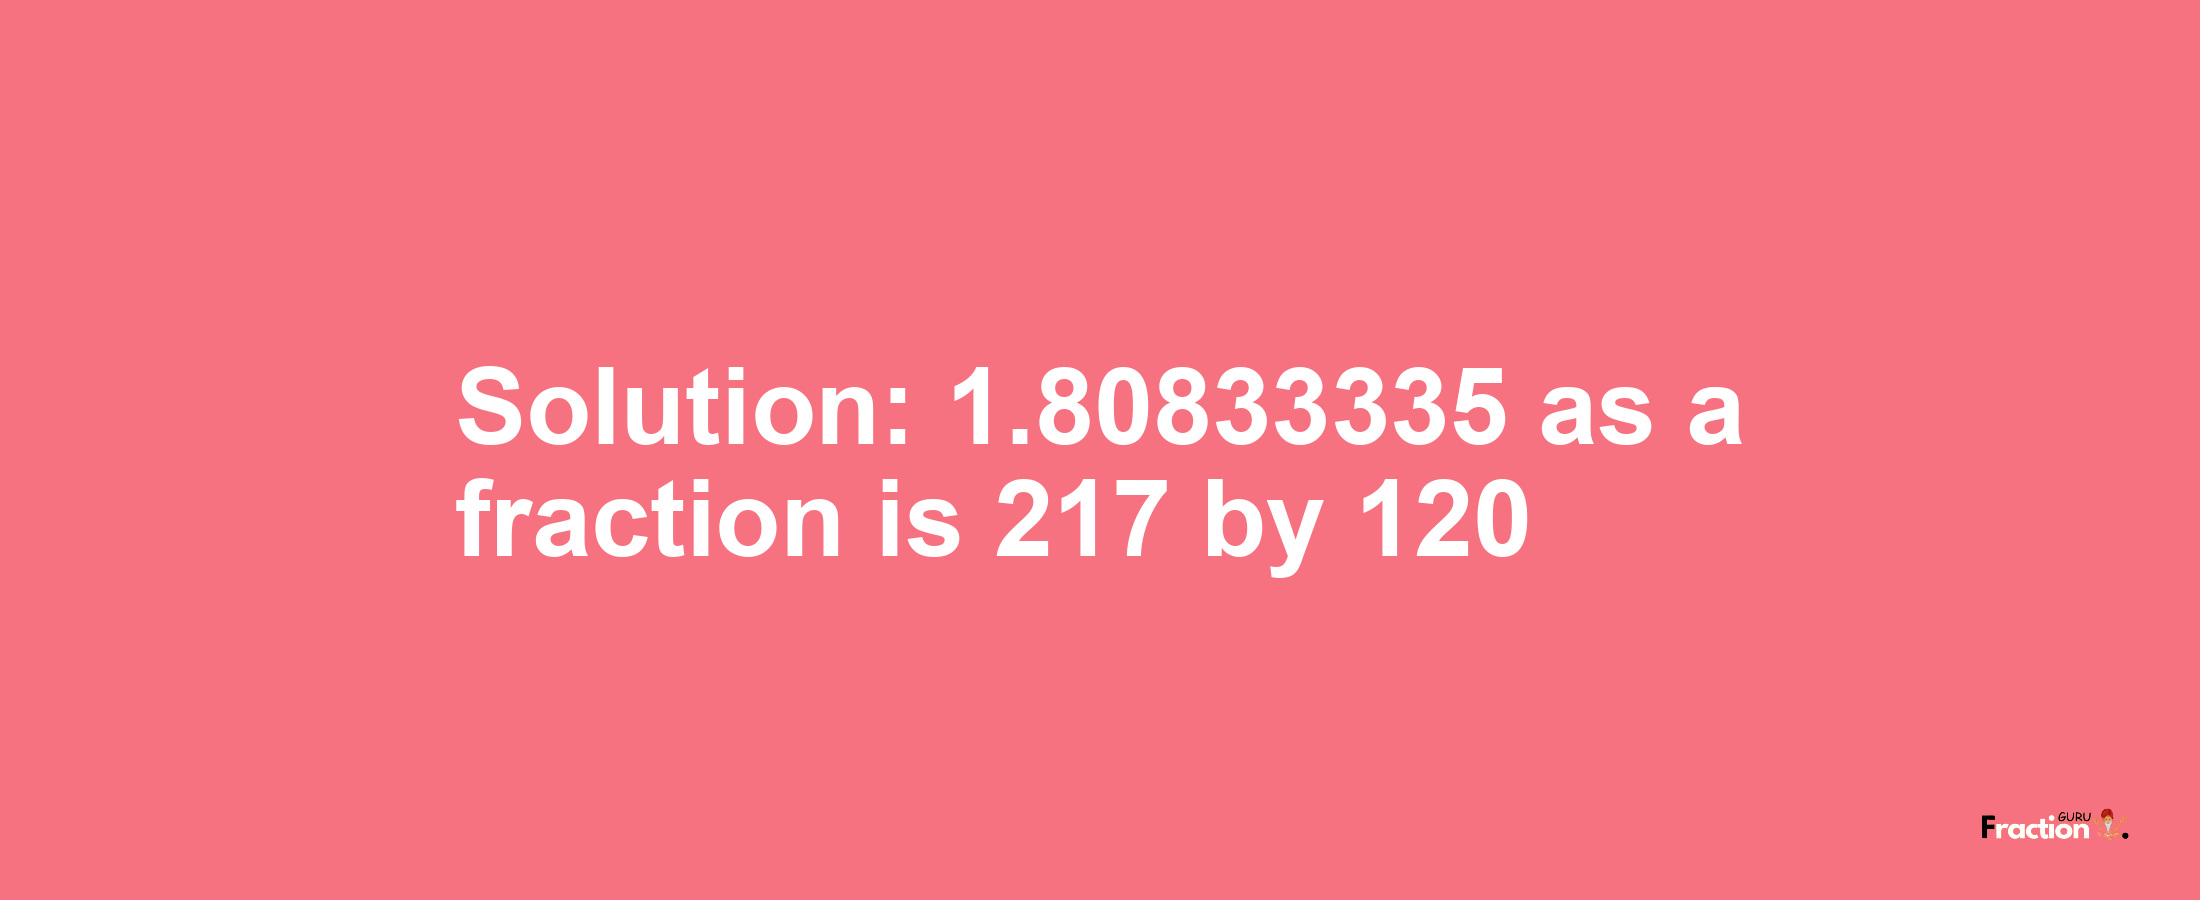 Solution:1.80833335 as a fraction is 217/120